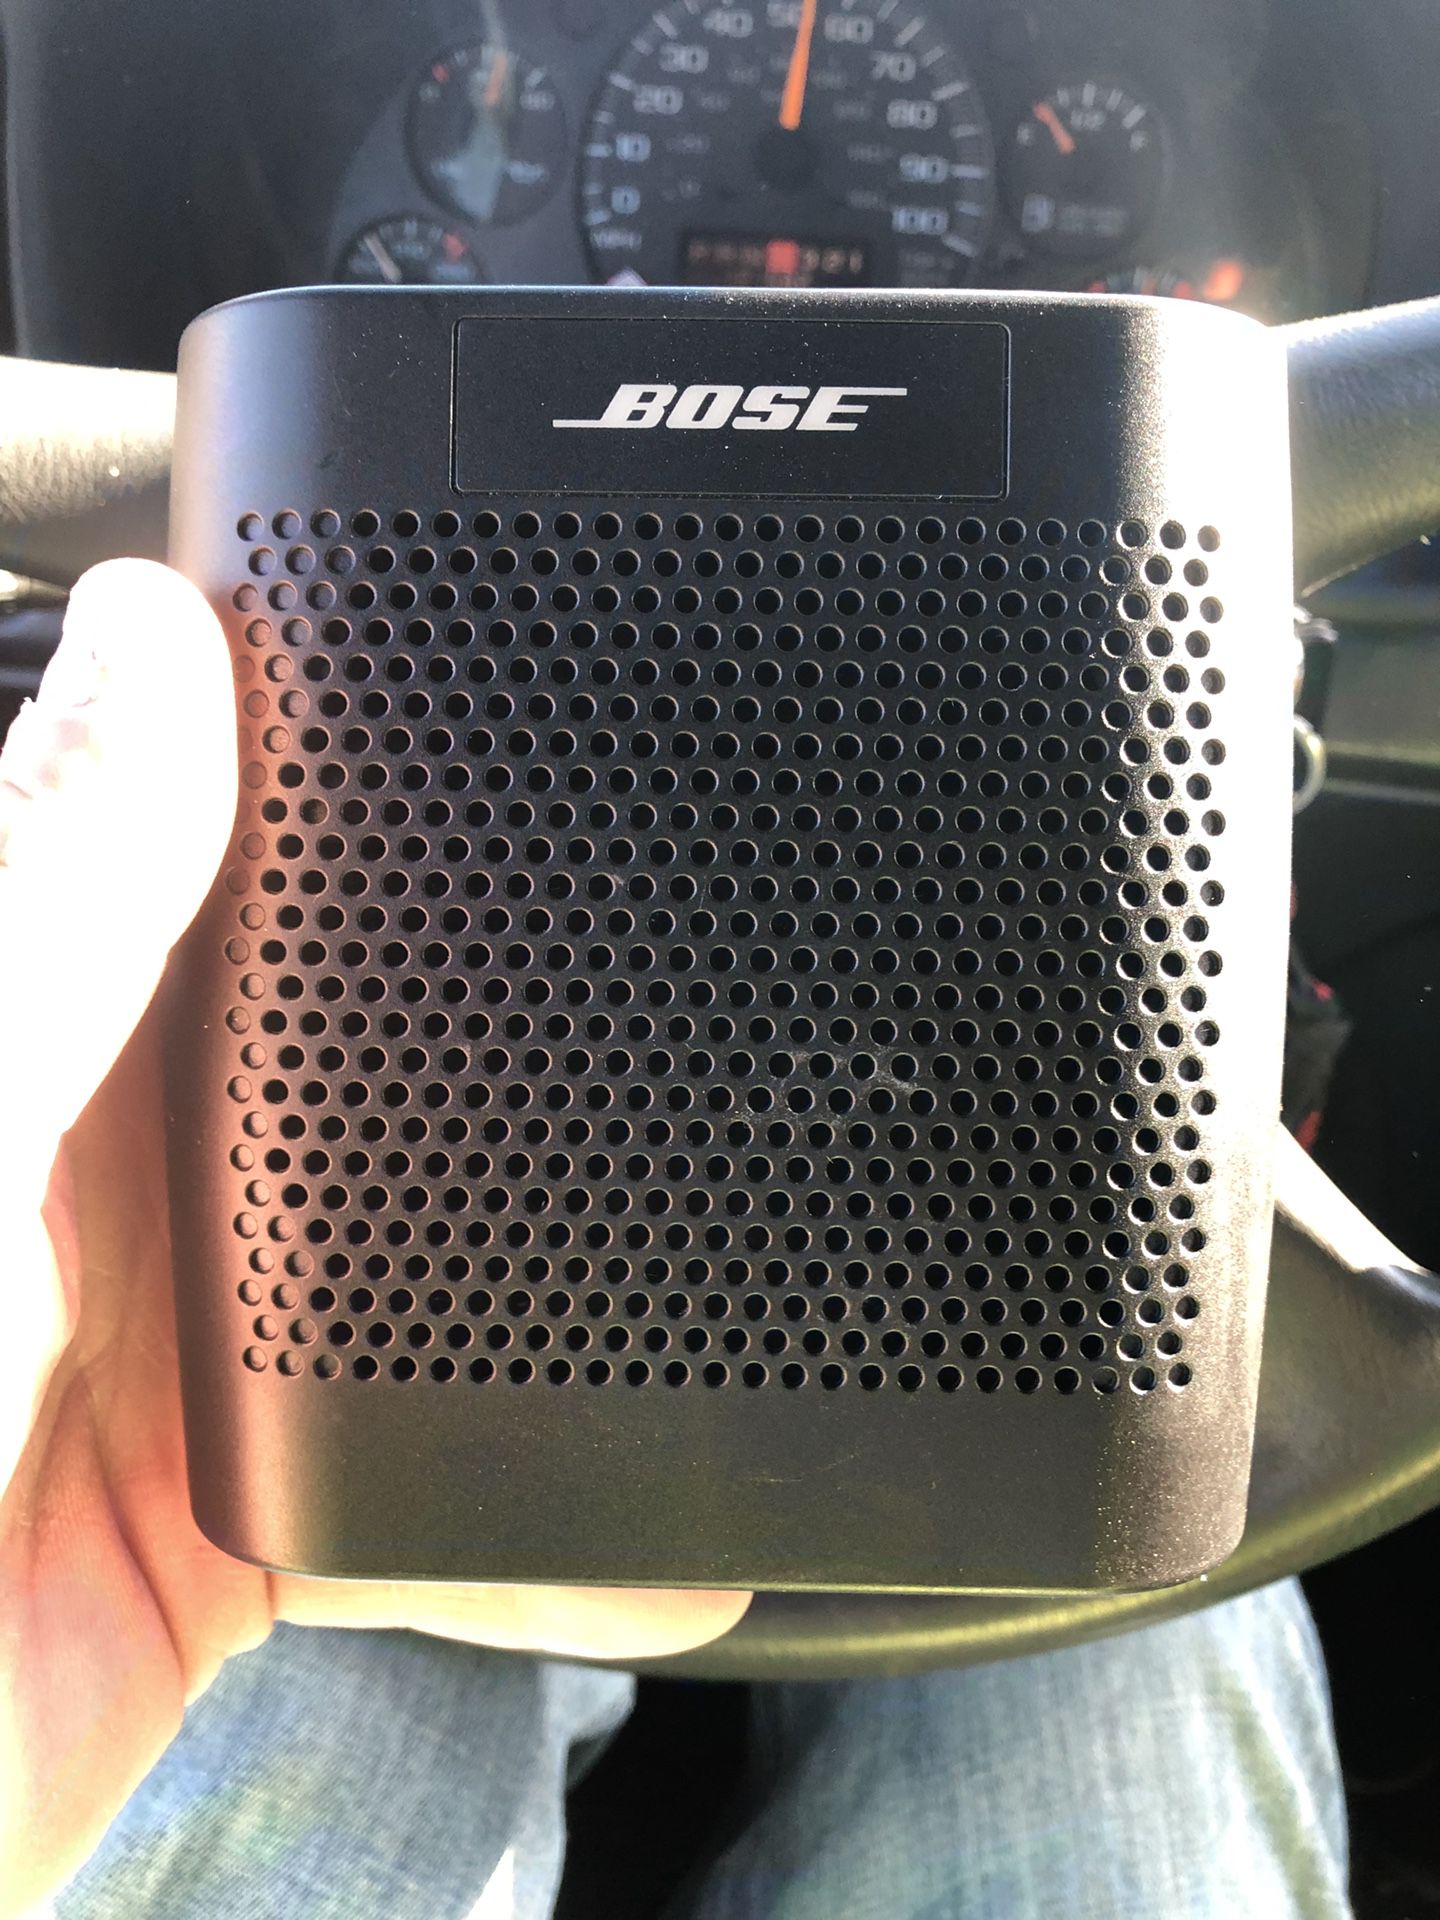 Bose Bluetooth speaker! This thing is amazing